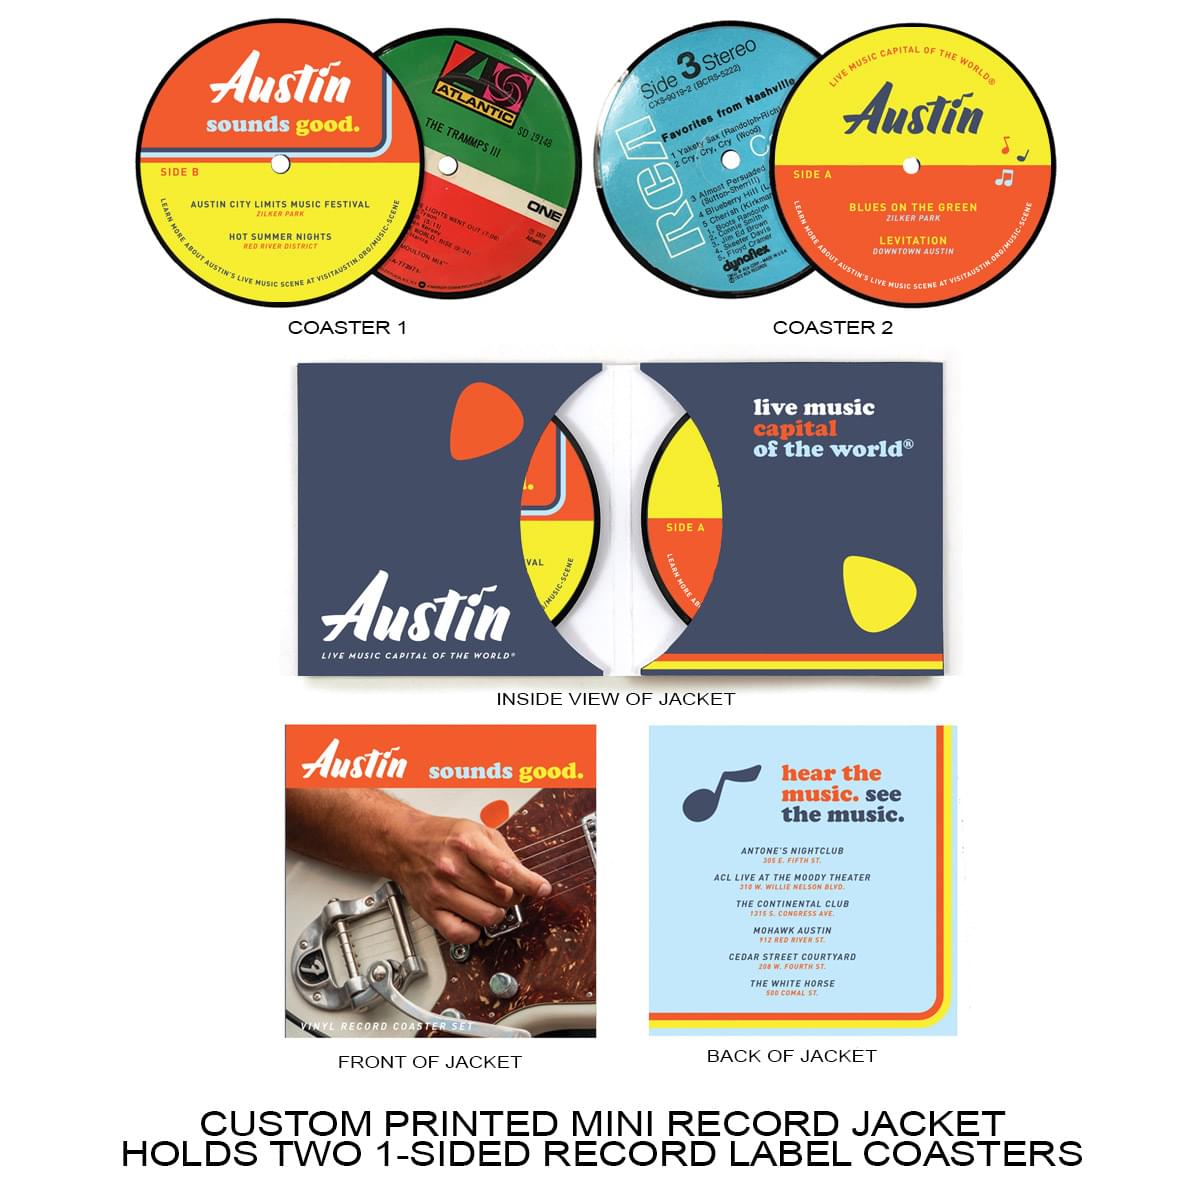 Double Sleeve - 1-Sided Record Label Coasters